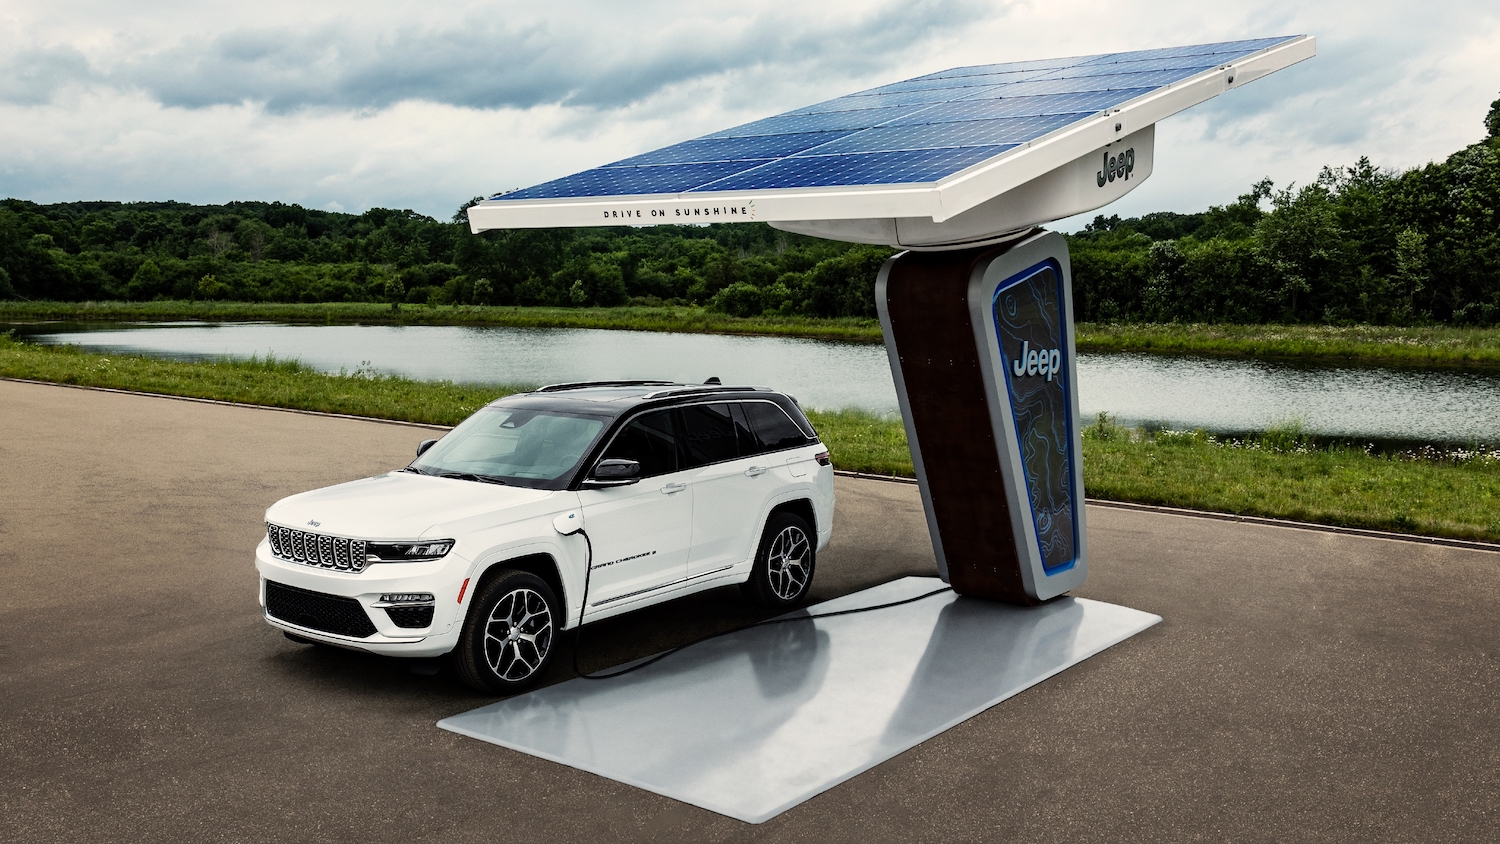 Jeep Grand Cherokee 4xe plug-in hybrid suv plugged into a solar charger by a pond, trees visible in the background.